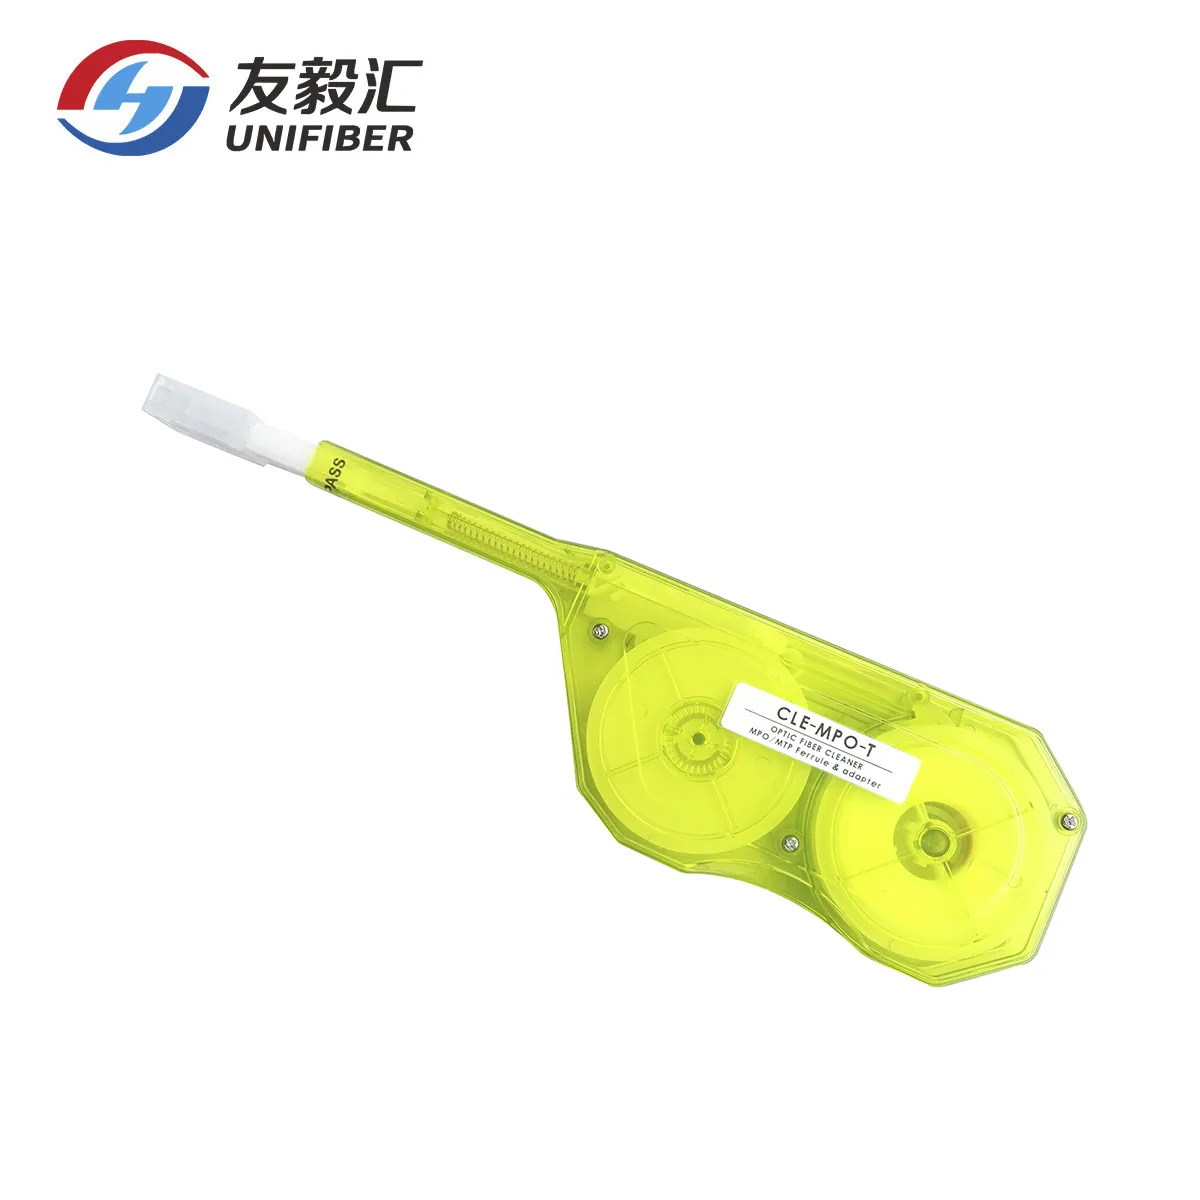 MTP/MPO Connector Fiber Optic Cleaner